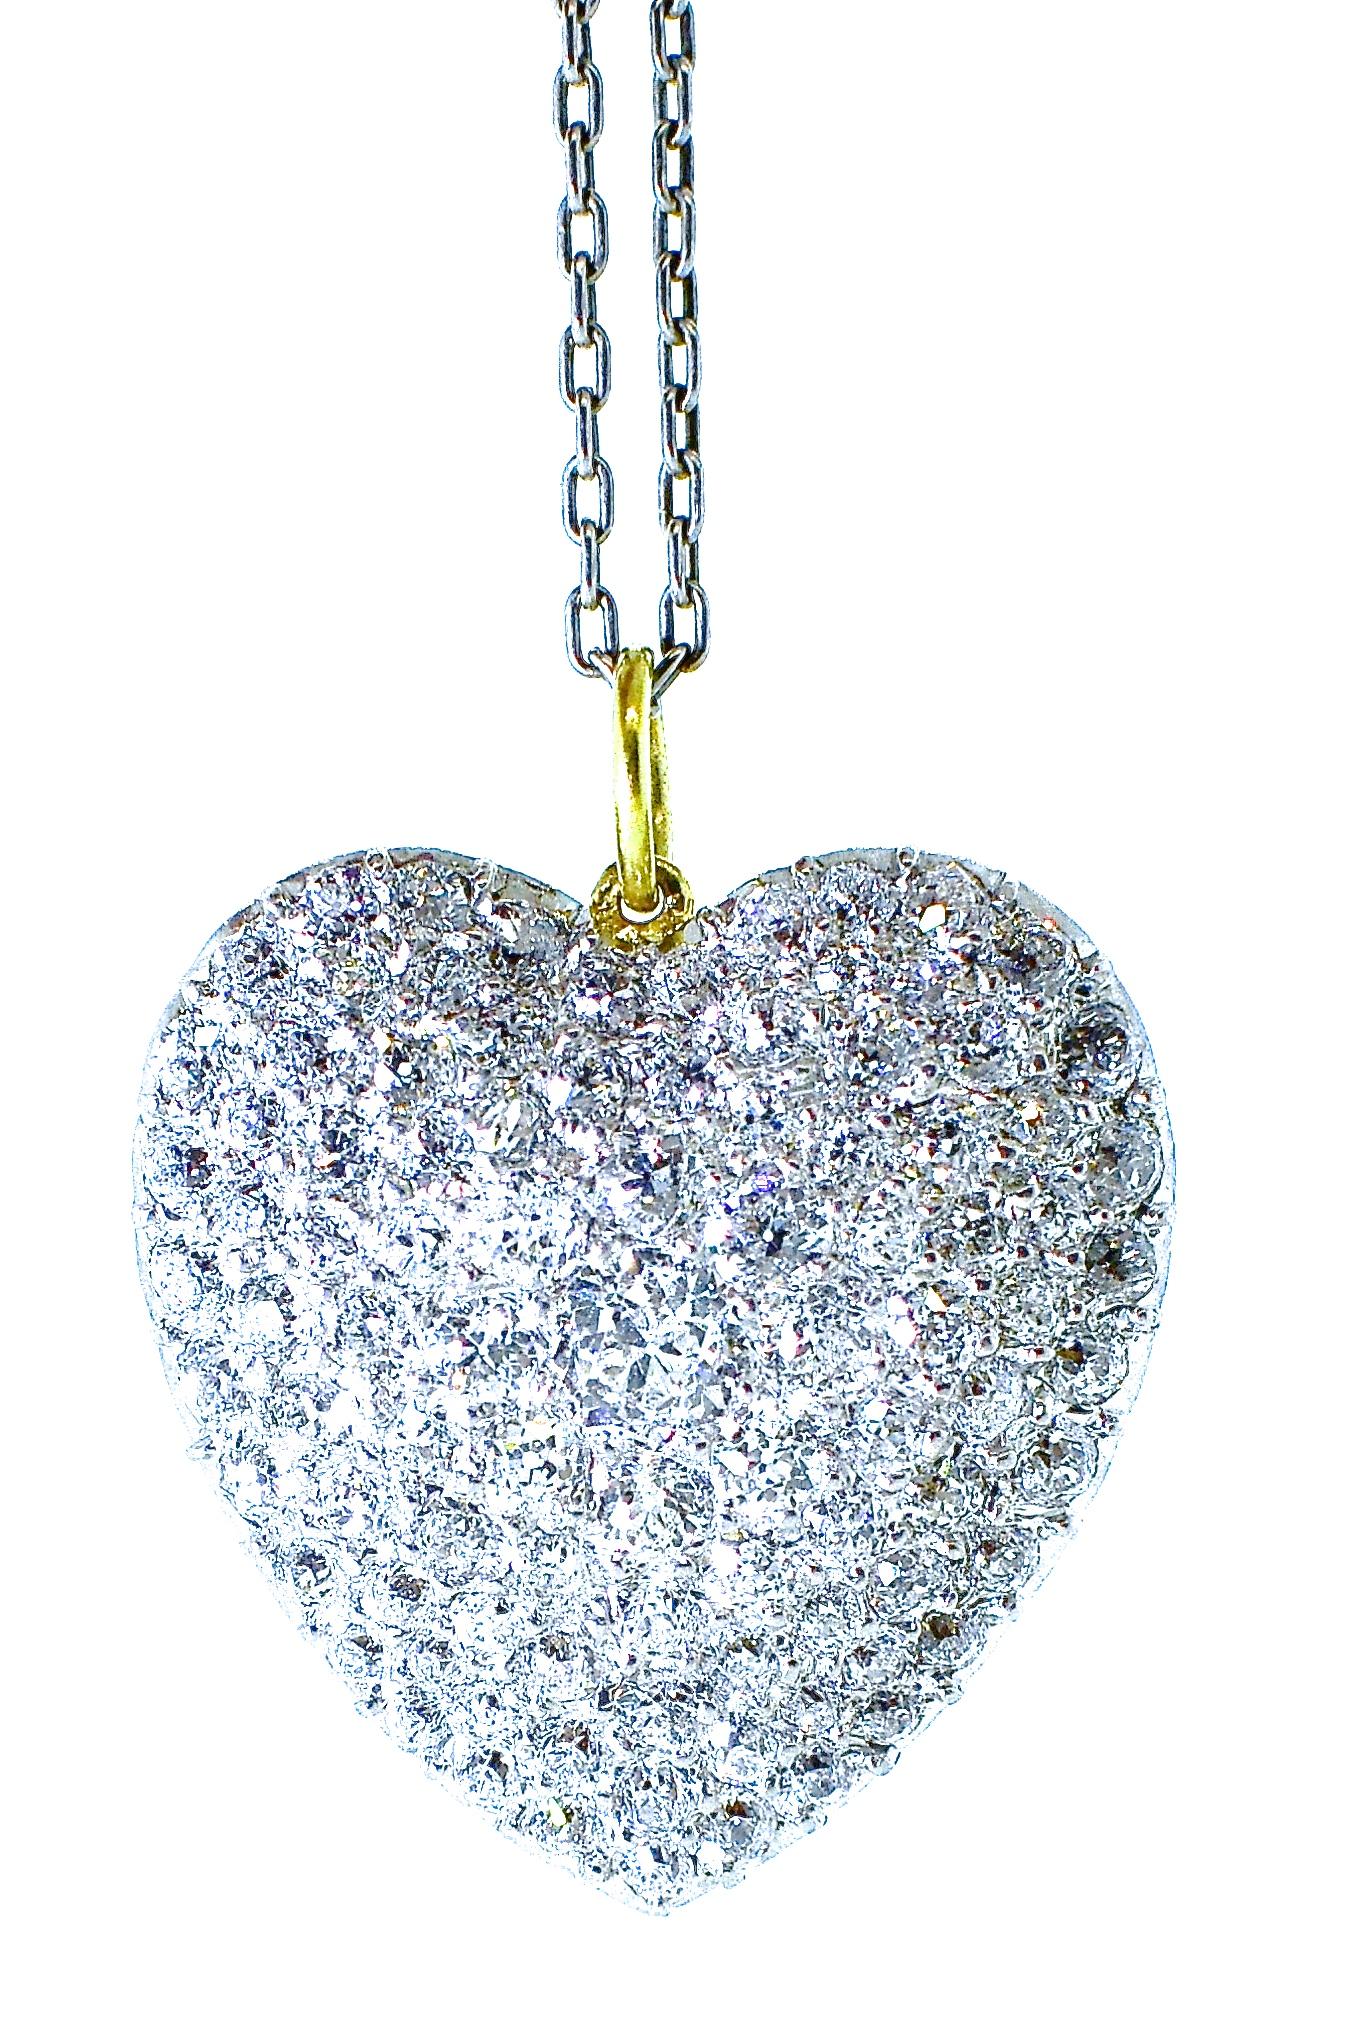 Antique diamond heart pendant in platinum and 18K gold.  Approximately 3 cts., of fine white diamonds, all well cut and well matched, H in color (near colorless) and very slightly included (VS) in clarity.  Pave set in platinum.  Note how well the